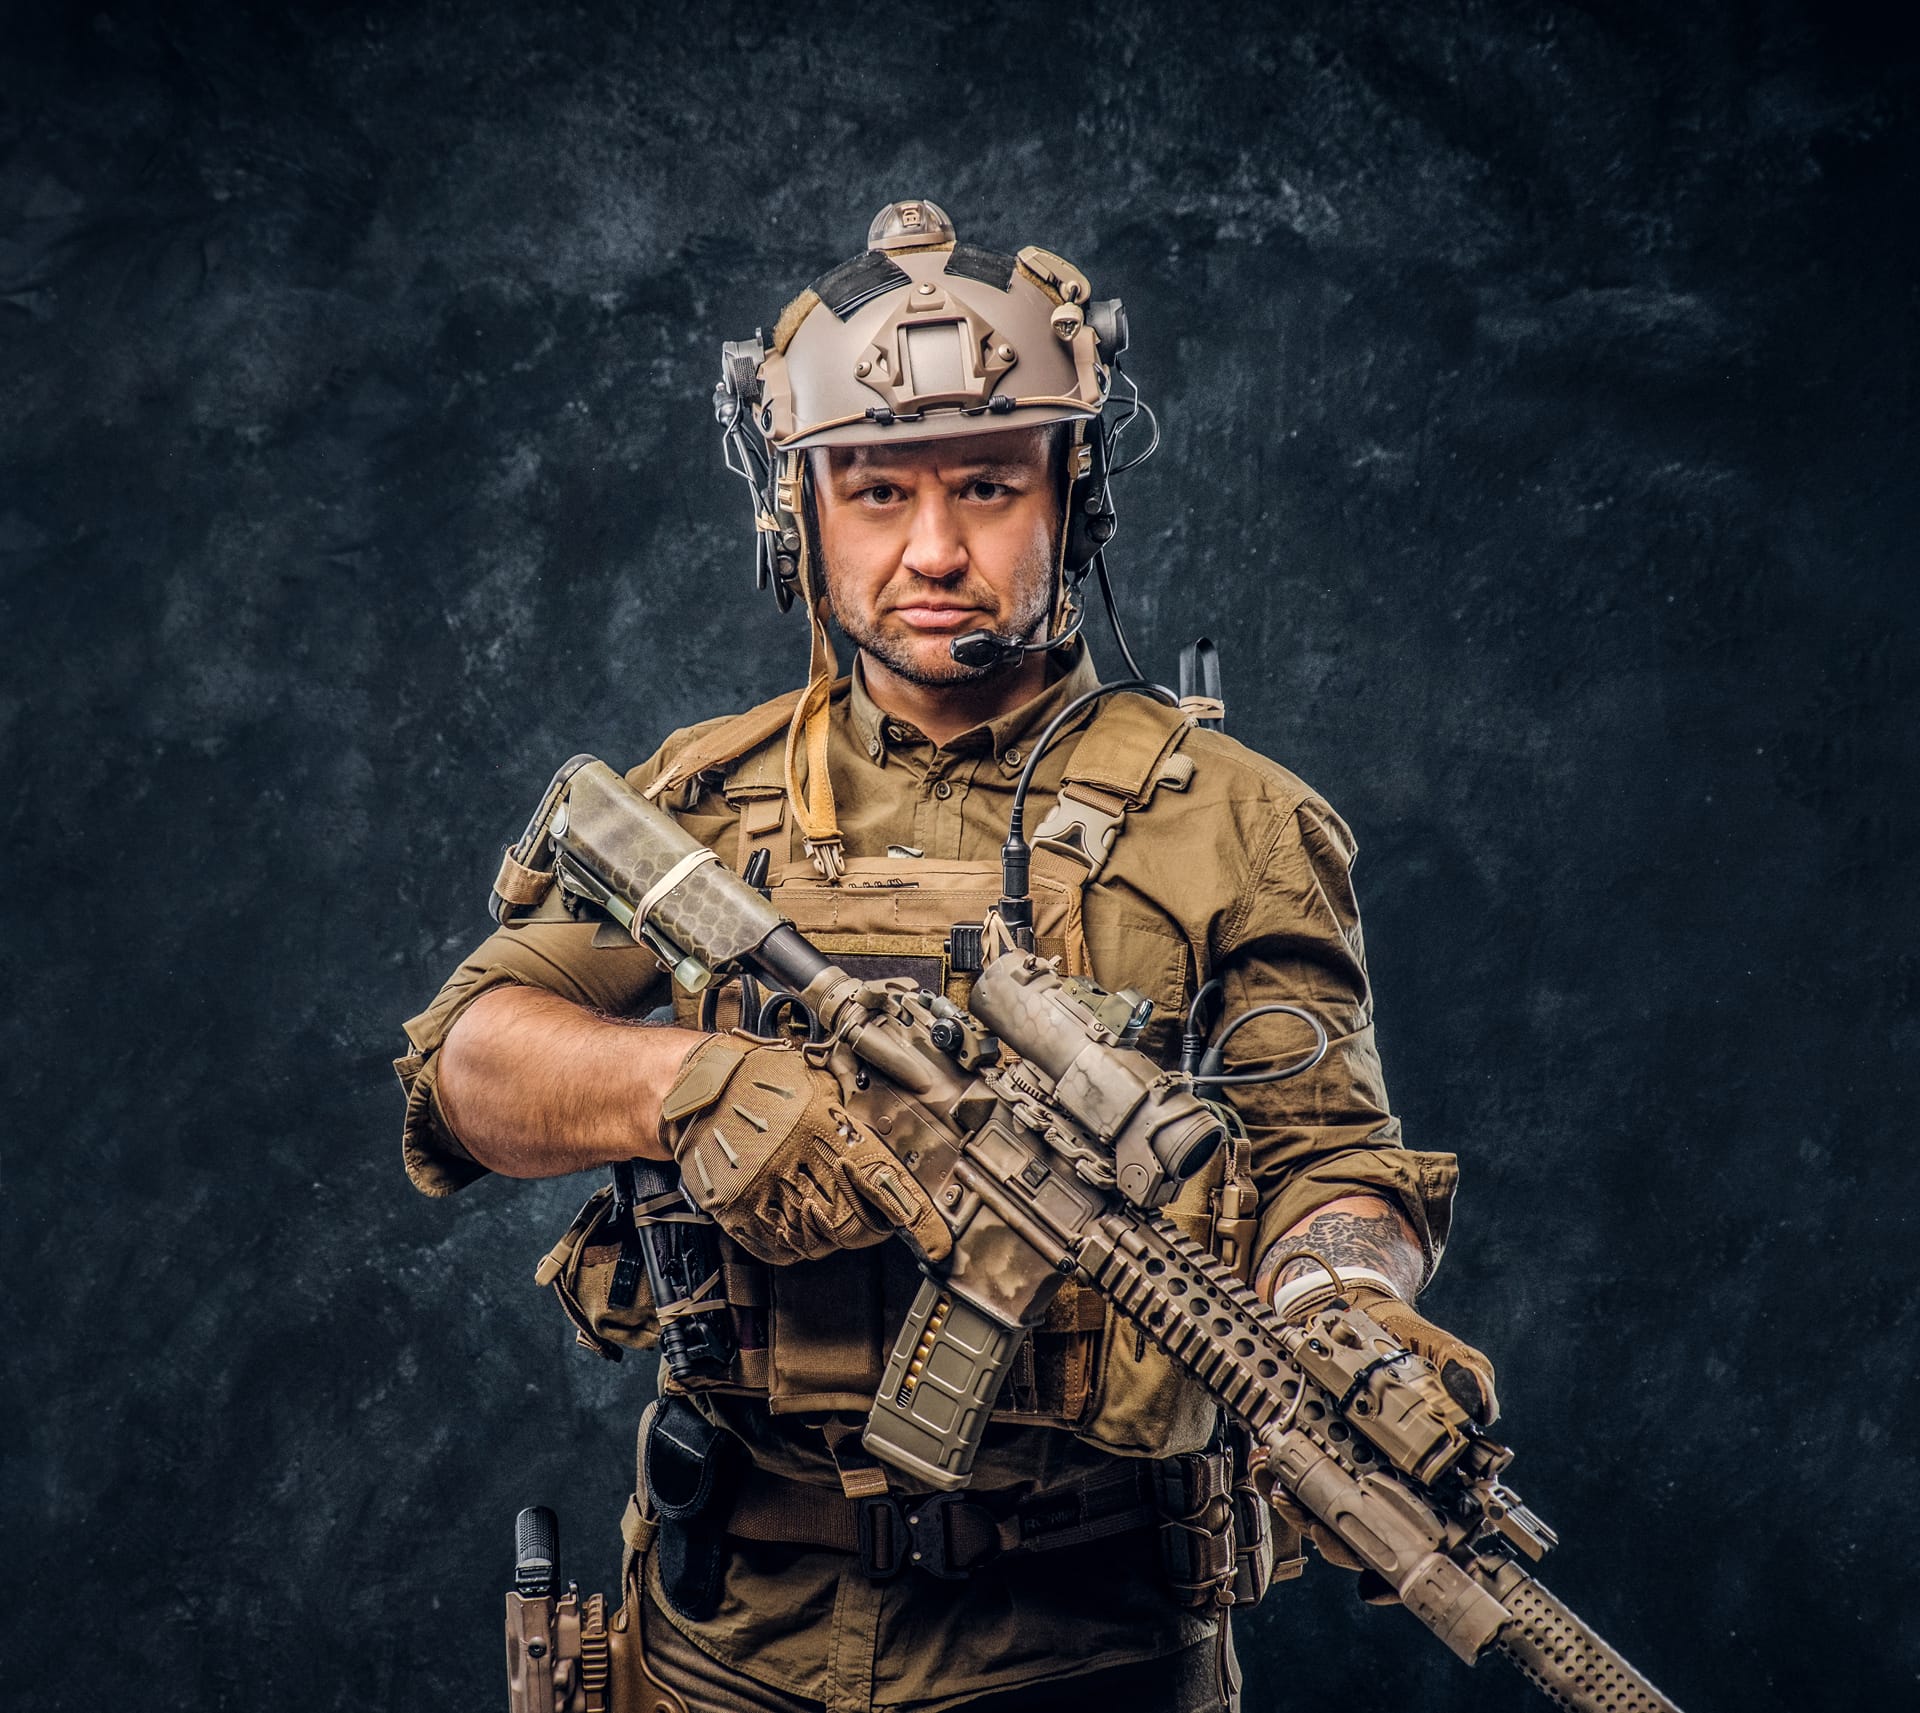 Soldier camouflage uniform posing with assault rifle